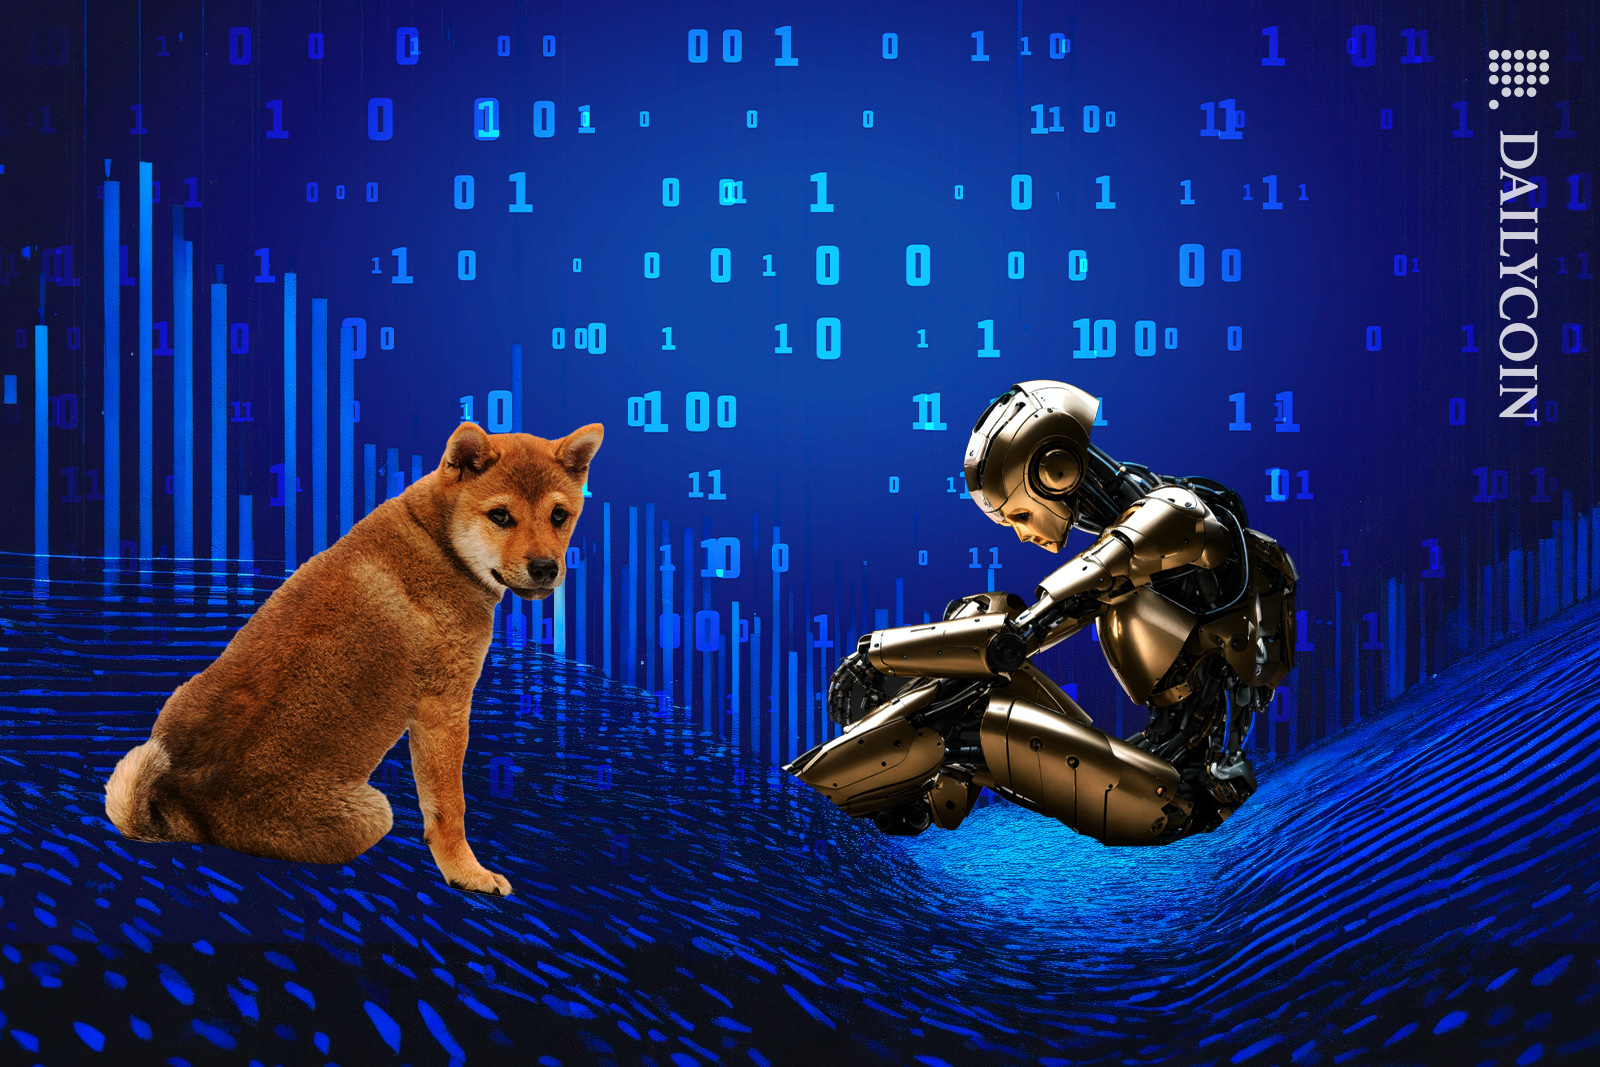 Robot dissapointed with Shiba Inu's low numbers.